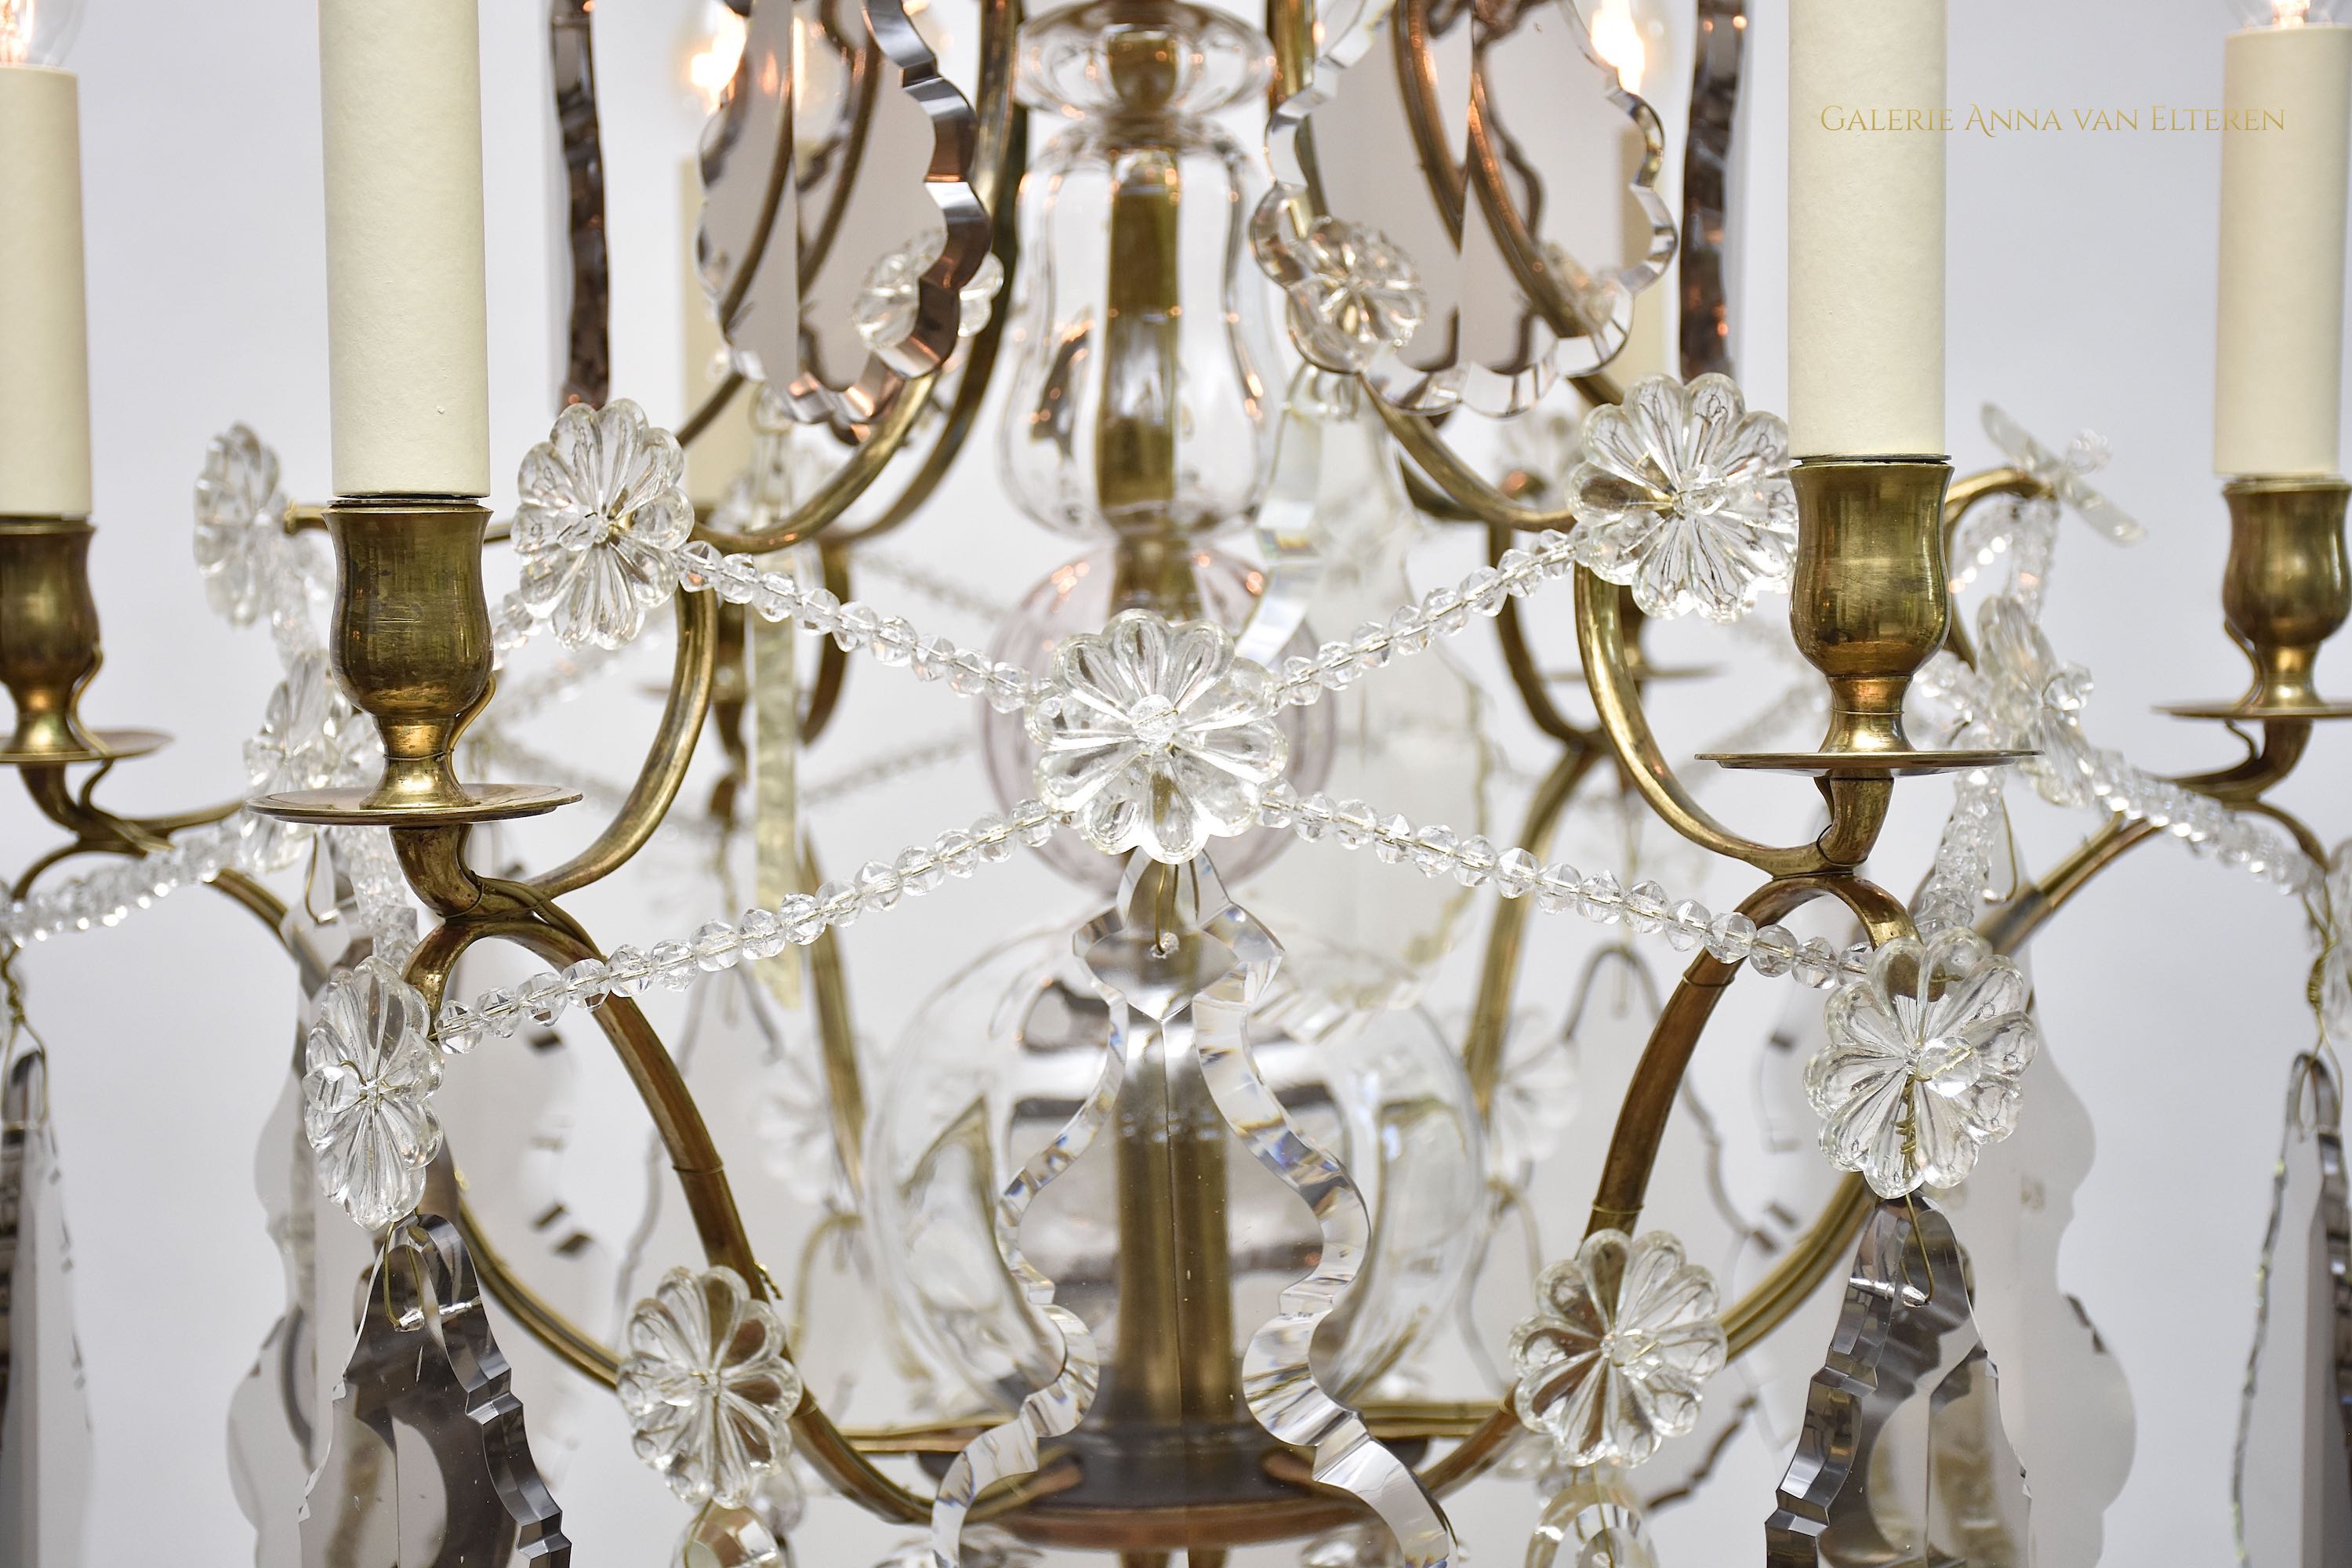 Antique crystal chandelier in the style of Rococo